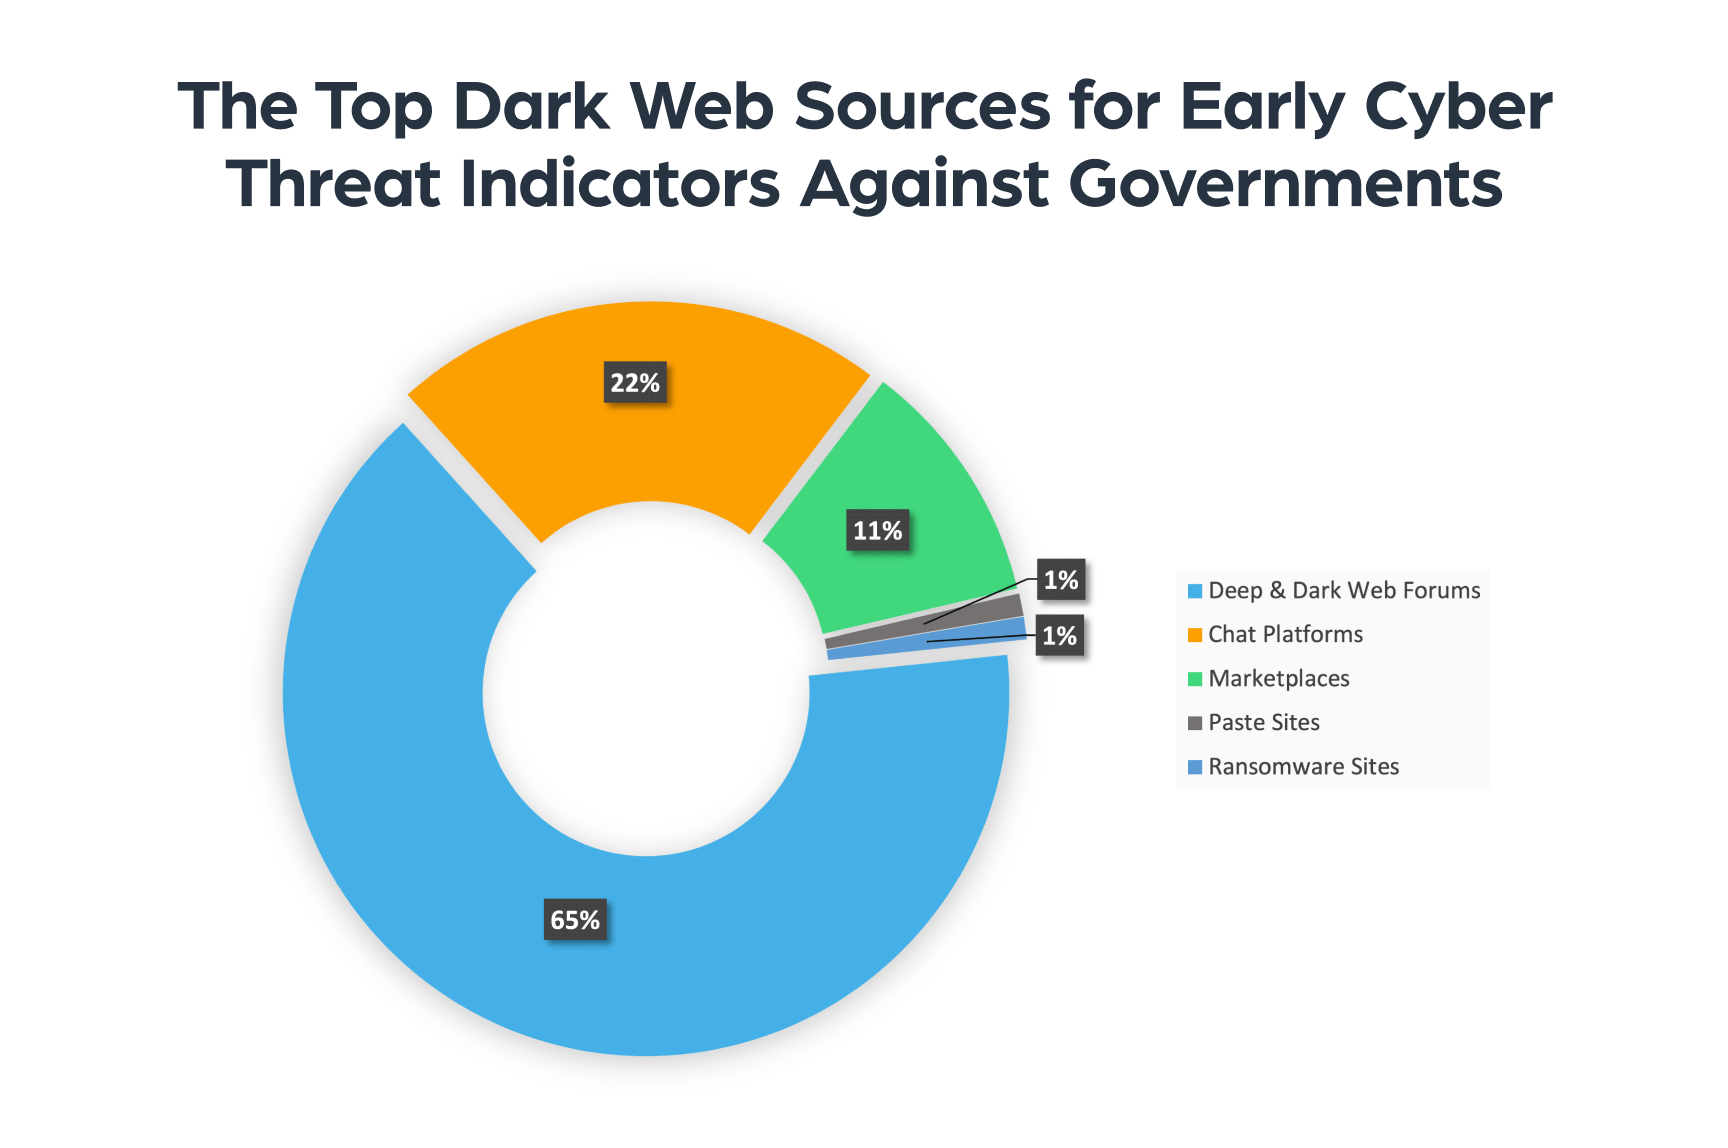 The top dark web sources for early cyber threat indicators against governments